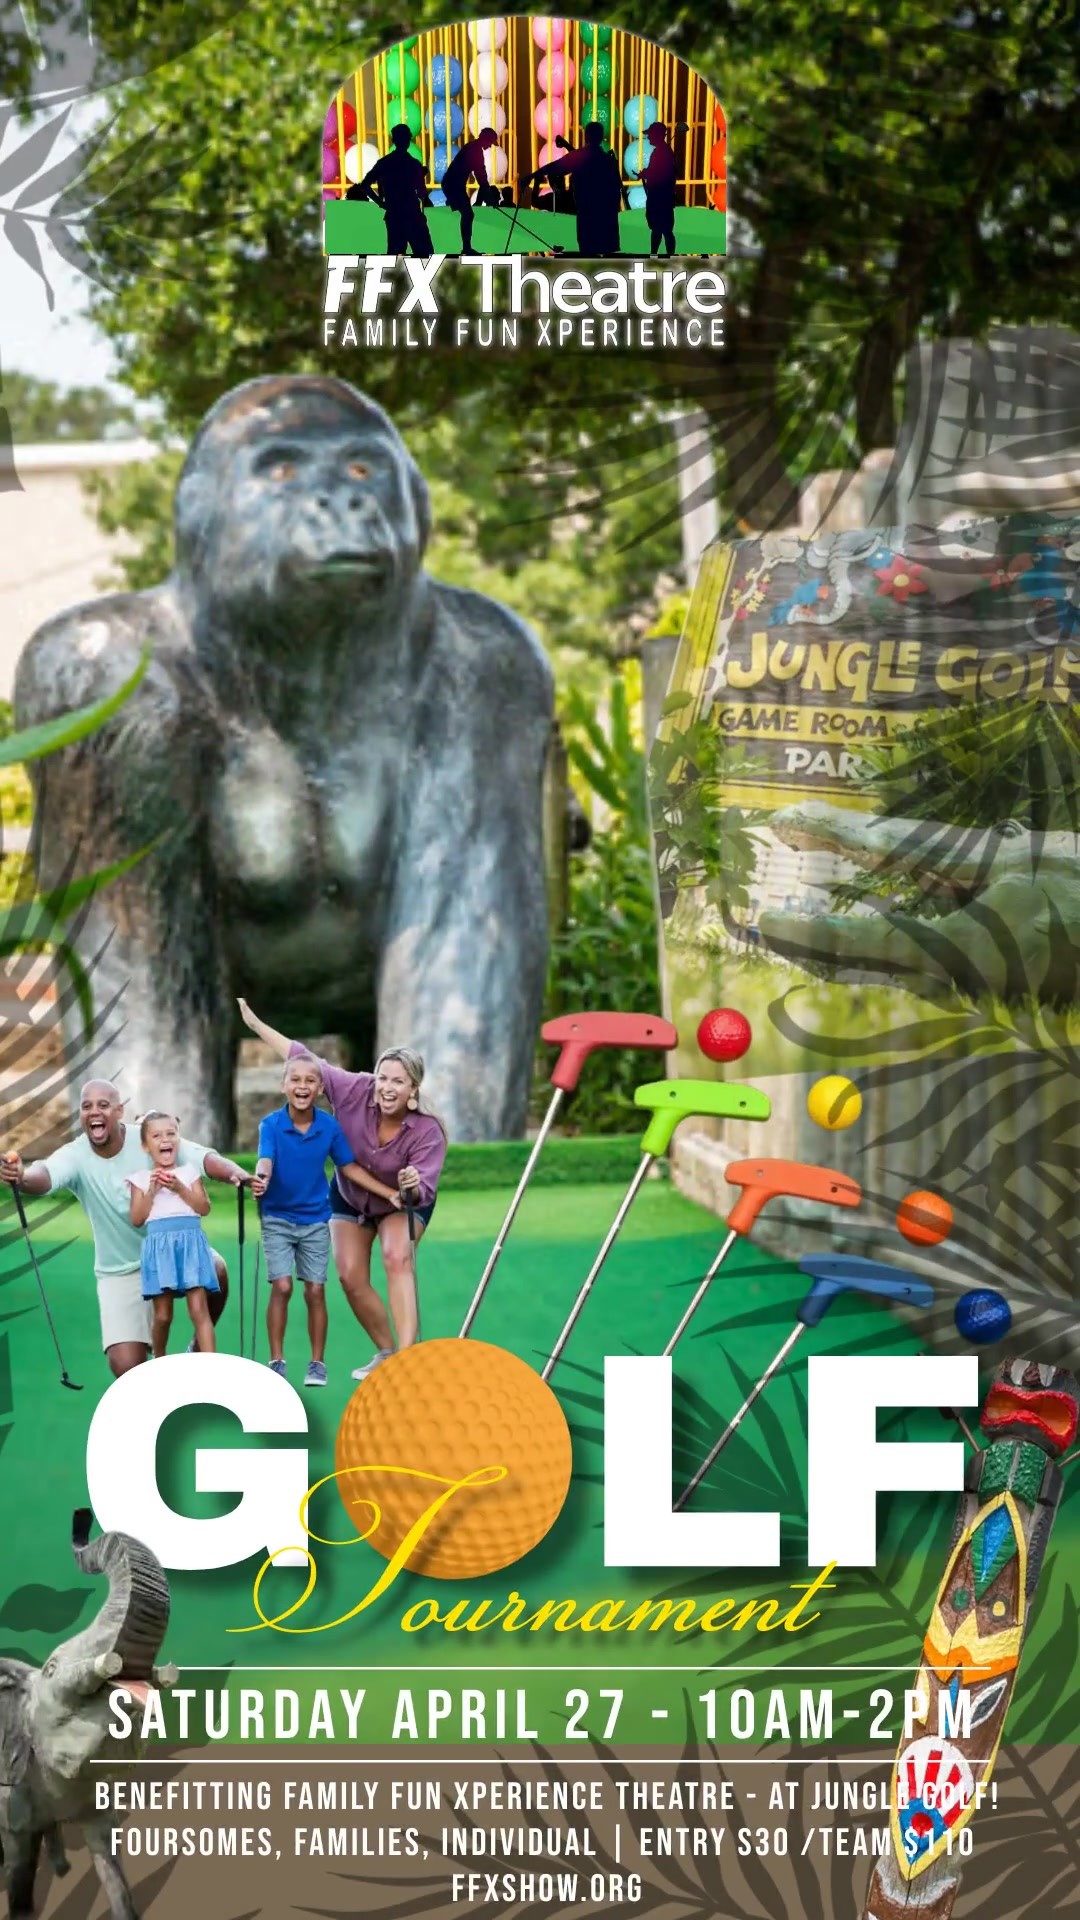 Jungle Golf Tournament! FFX Fun-raiser for all ages! on Apr 29, 00:00@Jungle Golf - Buy tickets and Get information on Family Fun Xperience tickets.ffxshow.org